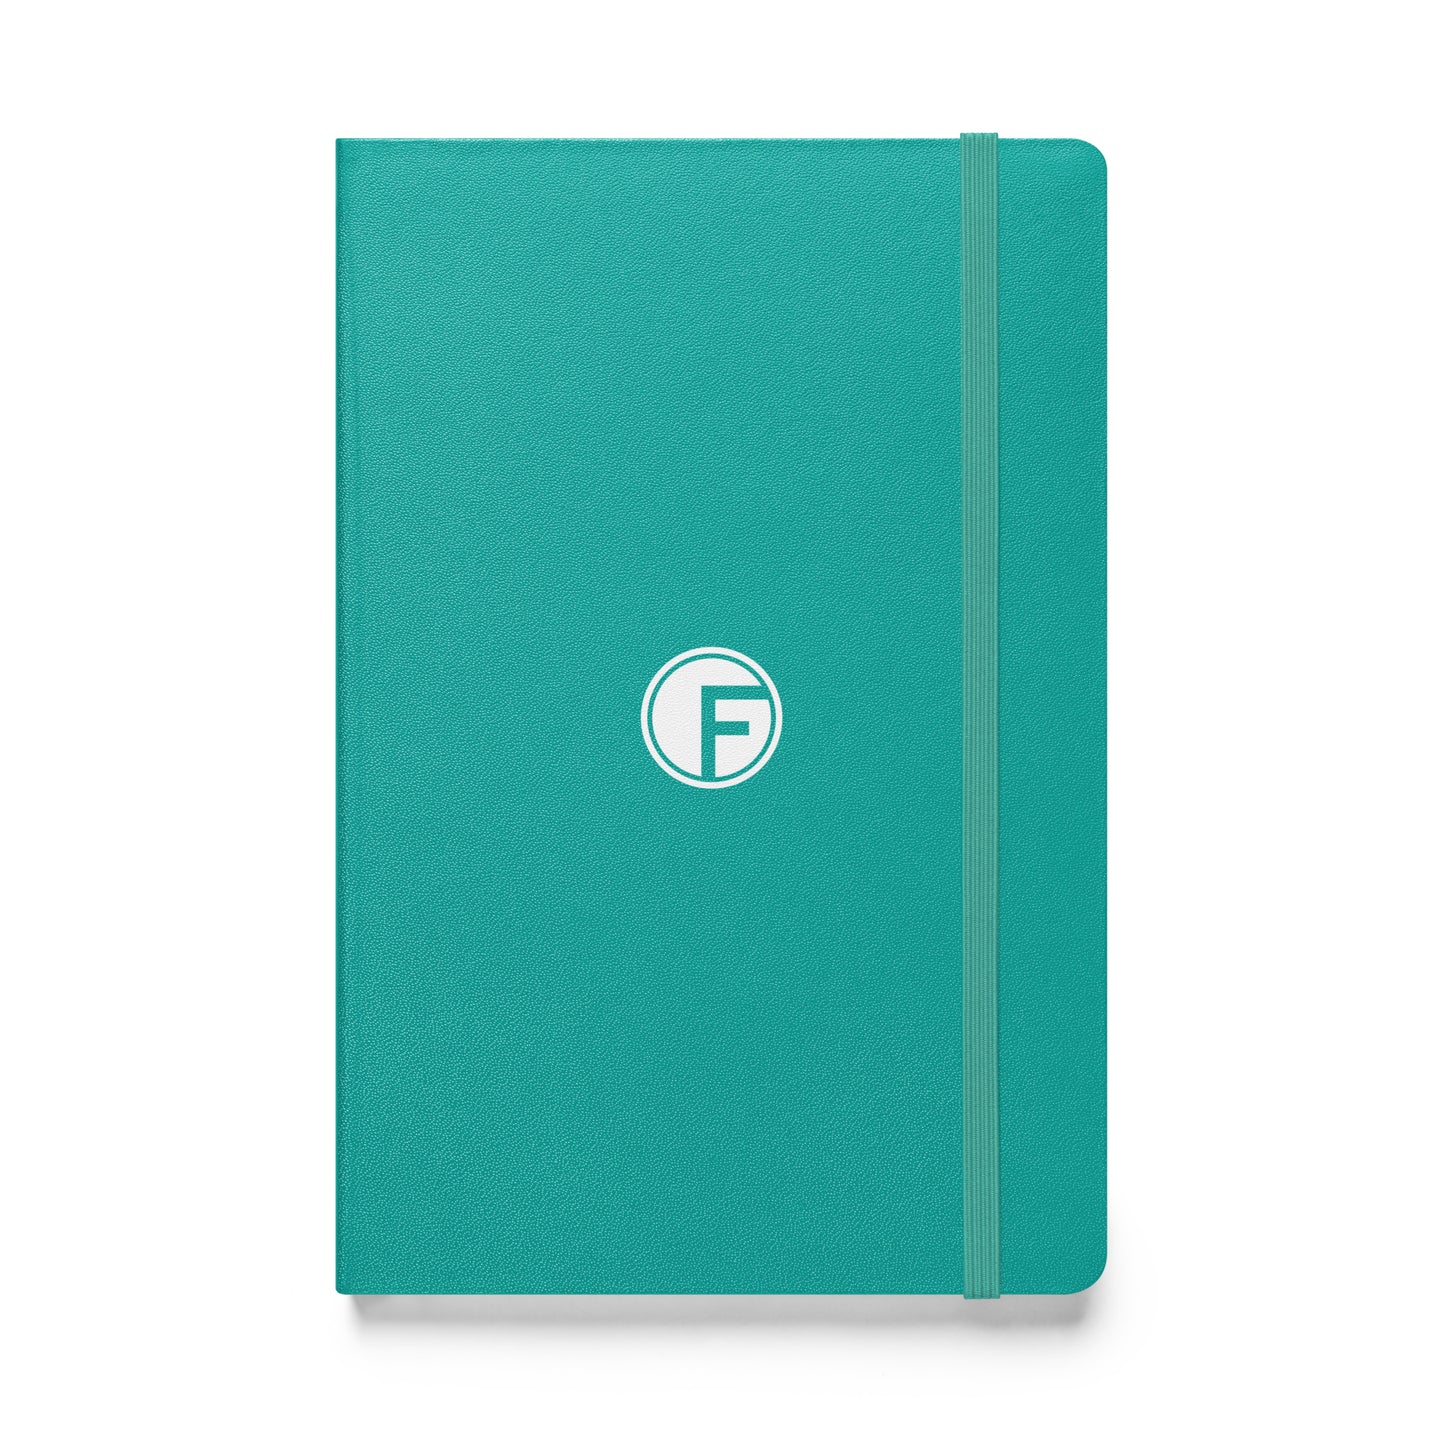 Foundations Hardcover bound notebook